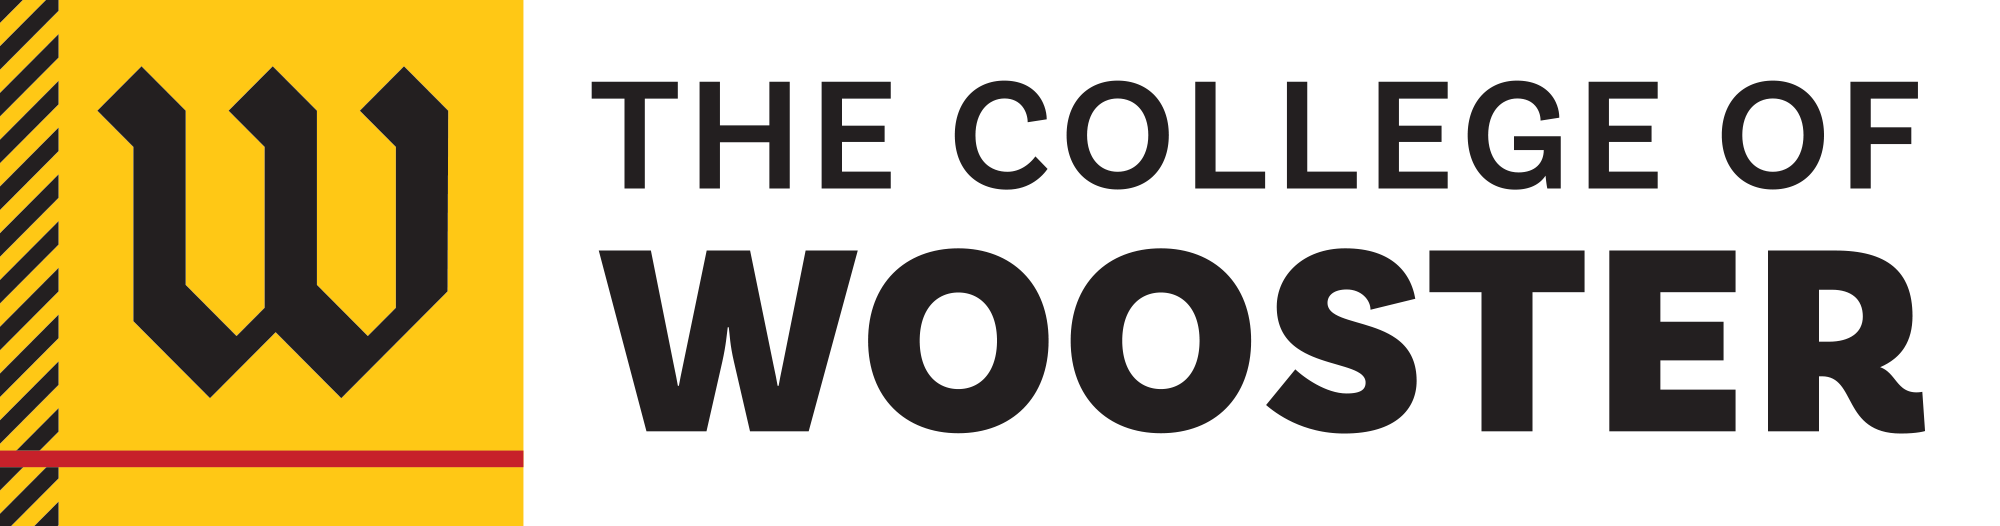 College of Wooster Logo.png